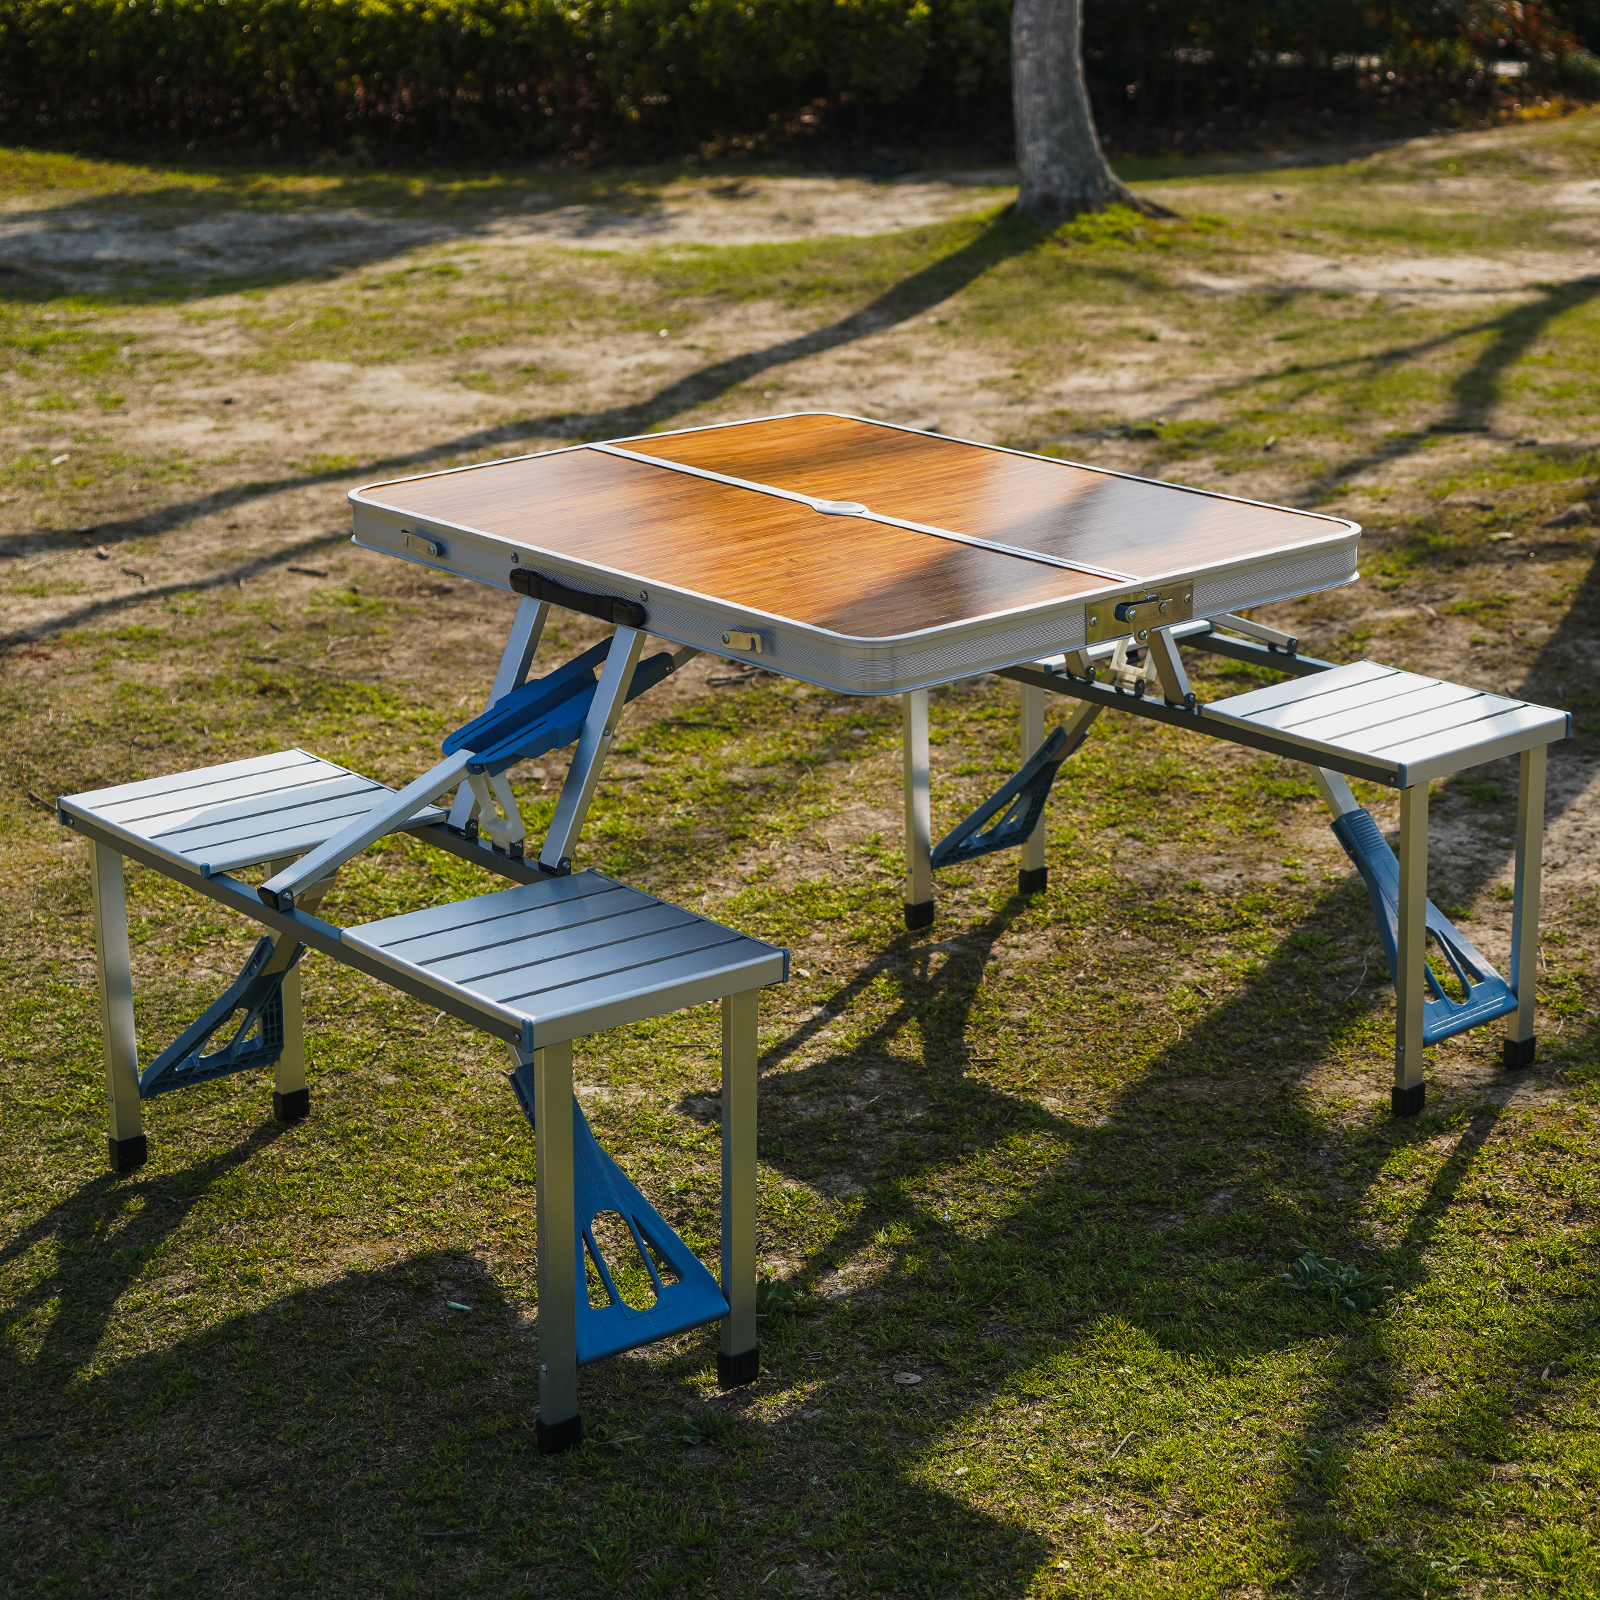 EURO SAKURA Folding Picnic Table Beach Set with Seats Chairs and Umbrella Hole Portable Camping Picnic Tables with Wooden - image 3 of 11